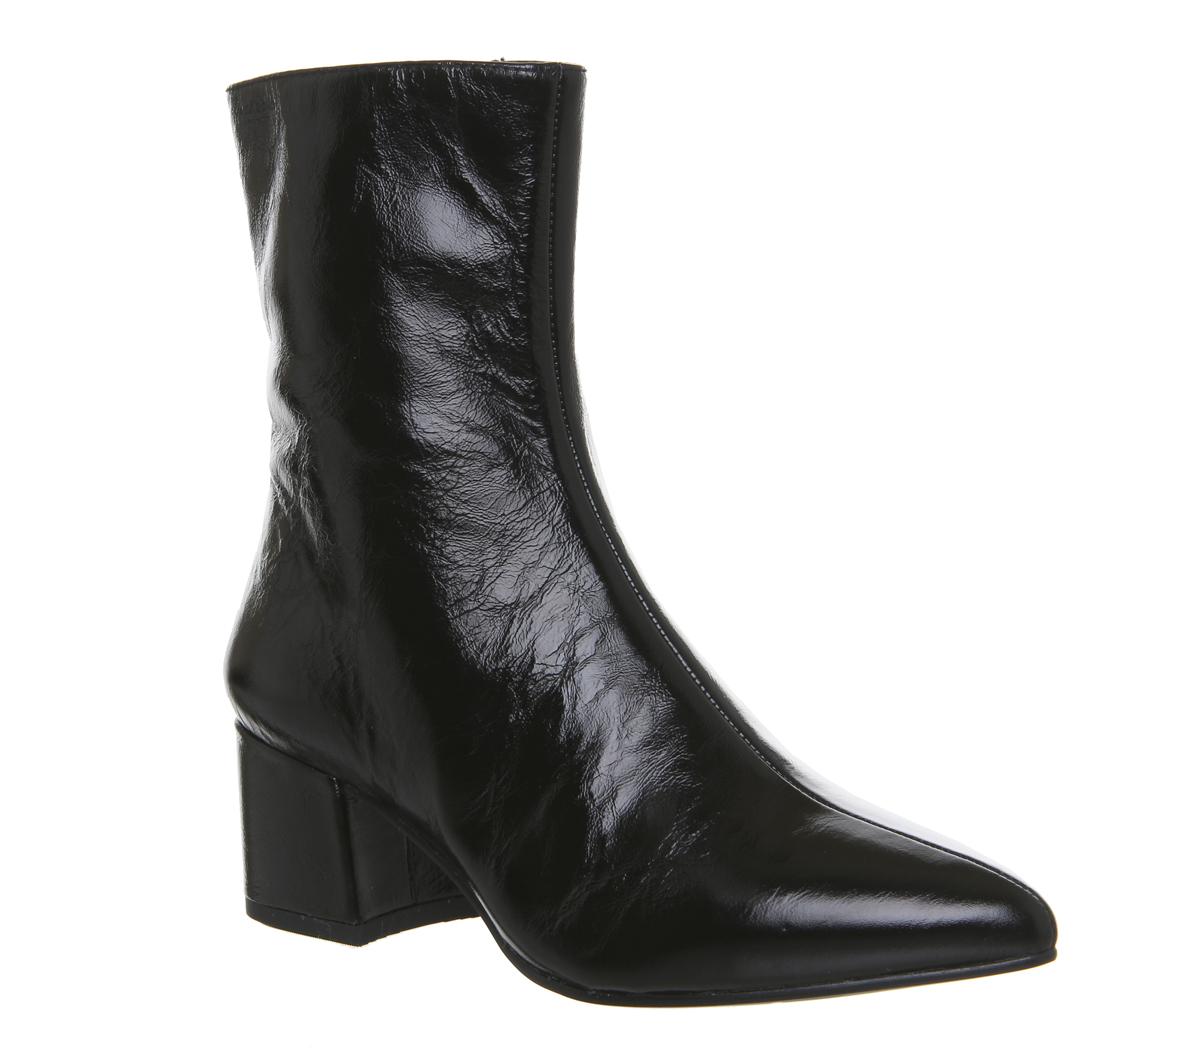 vagabond mya patent leather off white heeled ankle boot